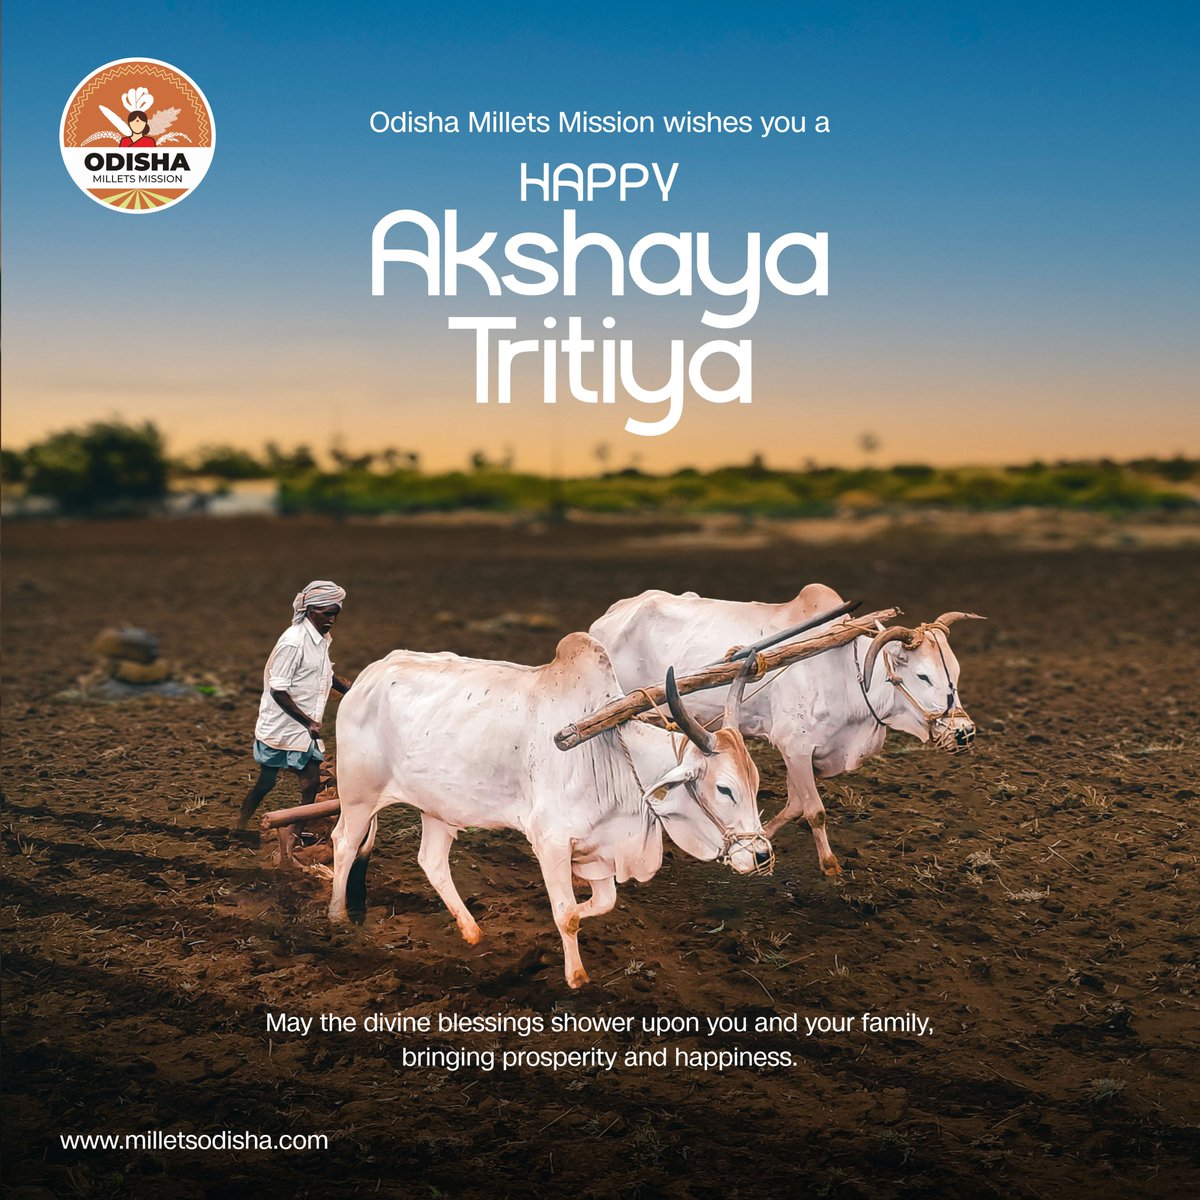 Akshaya Tritiya is a significant farming festival celebrated in the country annually. ‘Akshaya’ means ‘eternal' or ‘never diminishing’ and hints toward prosperity and growth. OMM wishes prosperity, success, and good fortune to you. @krushibibhag @WASSANIndia #OMM